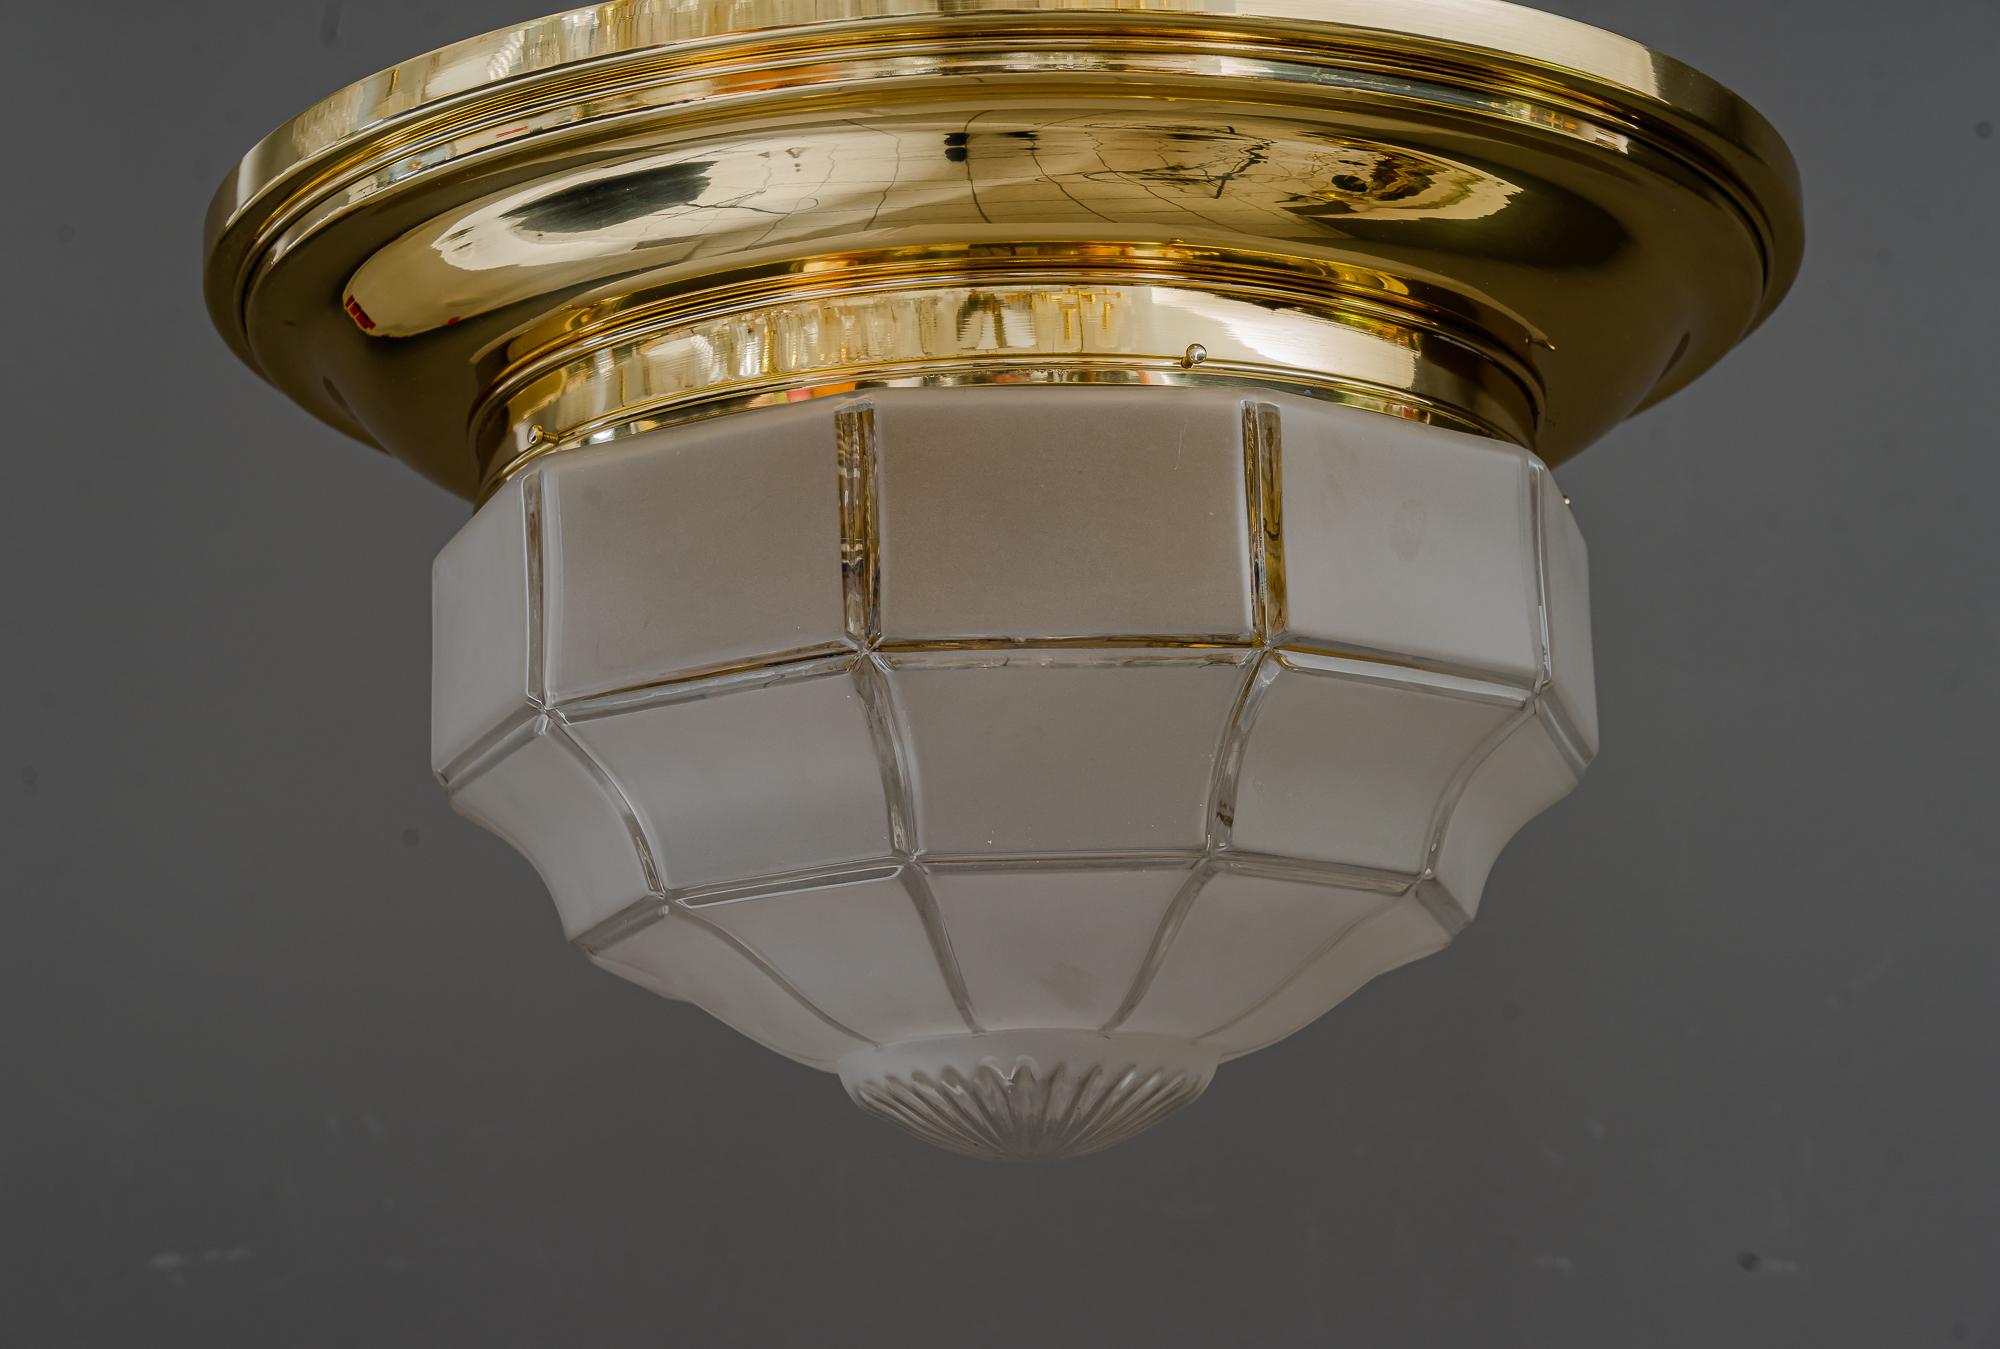 Huge Art Deco ceiling lamp vienna around 1950s
Brass polished and stove enamelled
Original glass shade
4 Bulbs e27.